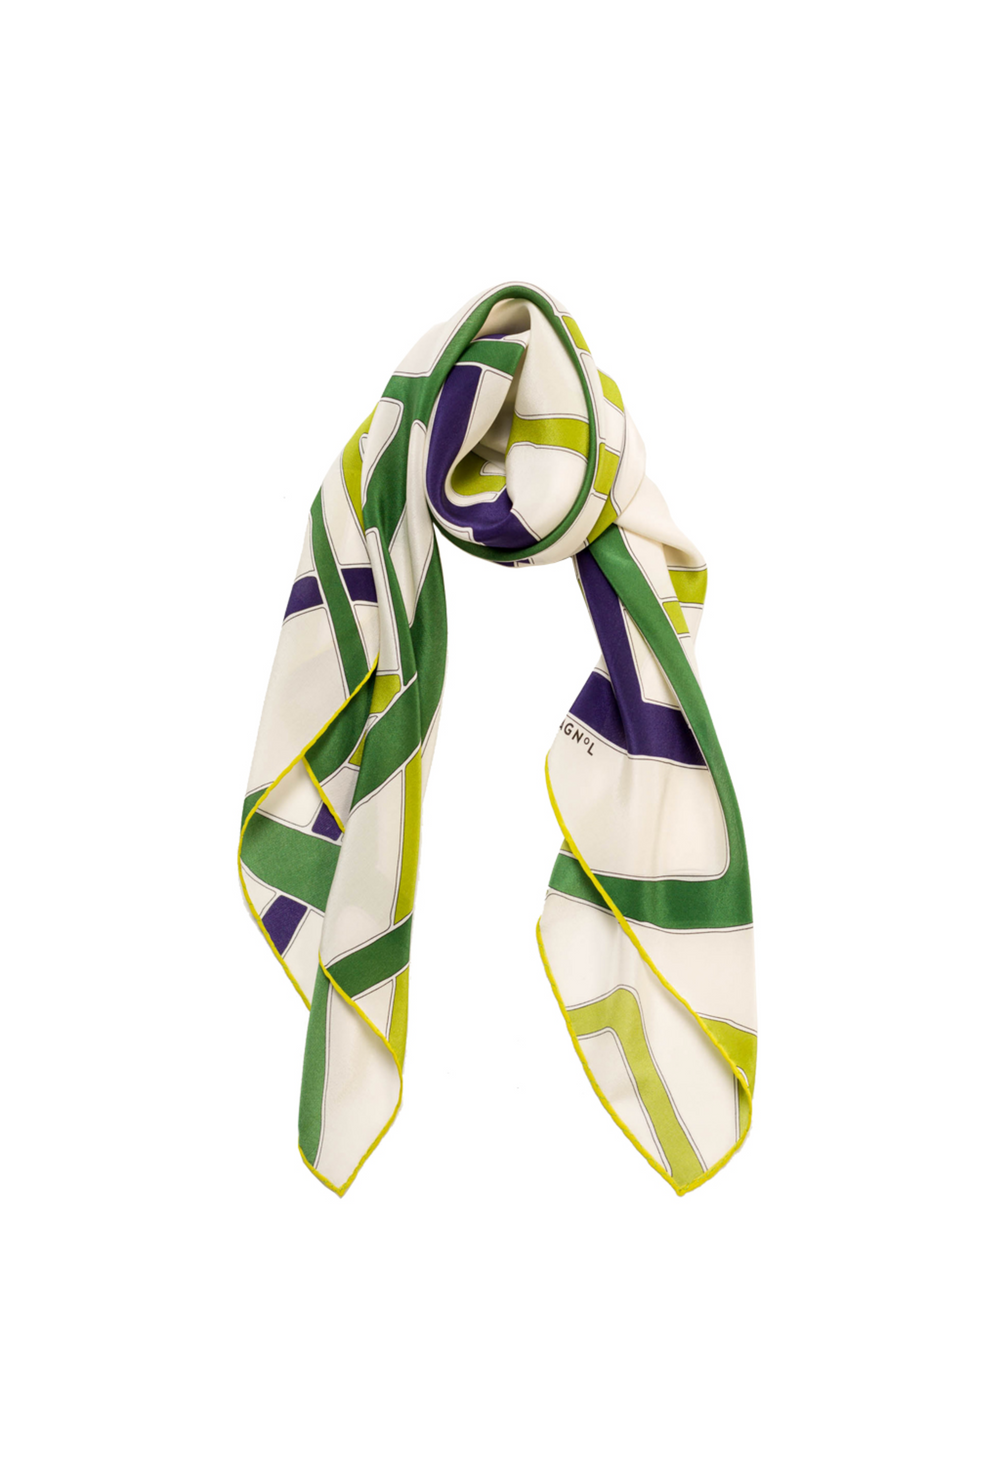 COLONY - GHOST NETS - WHITE/GREENS FOULARD